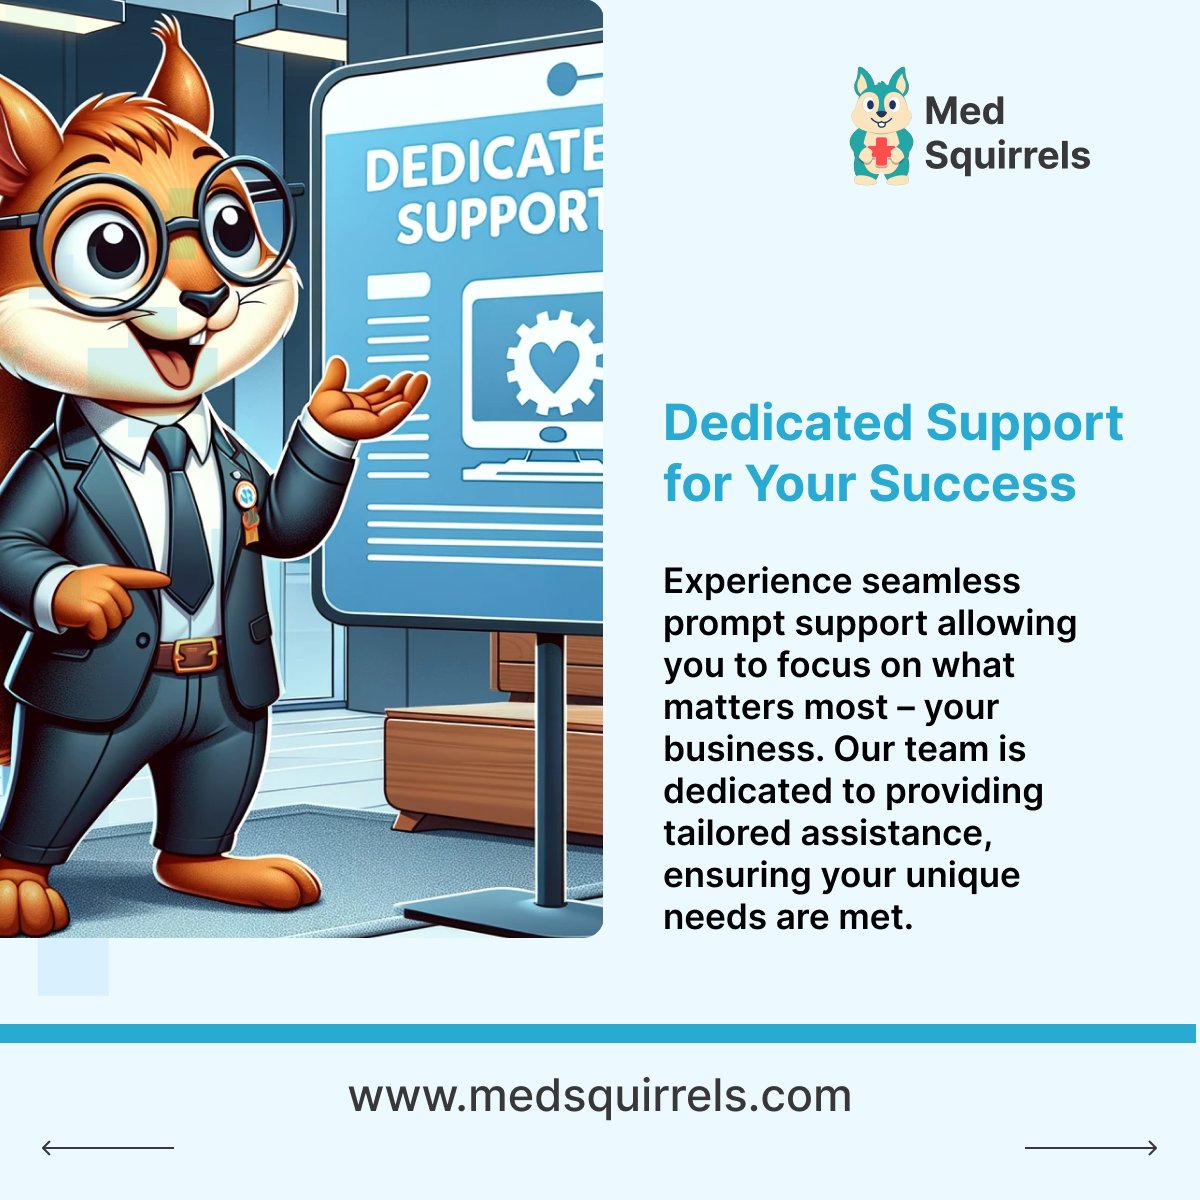 Seeking healthcare talent? From recruitment to payroll, let MedSquirrels handle it all seamlessly with our Purple Plan.📆 Request a Demo: bit.ly/3TZKIxB
#MedSquirrels #healthcarestaffing #HealthcareHiring #saasplatform #HiringSolutions #HealthTech #MedSquirrelspurplePlan